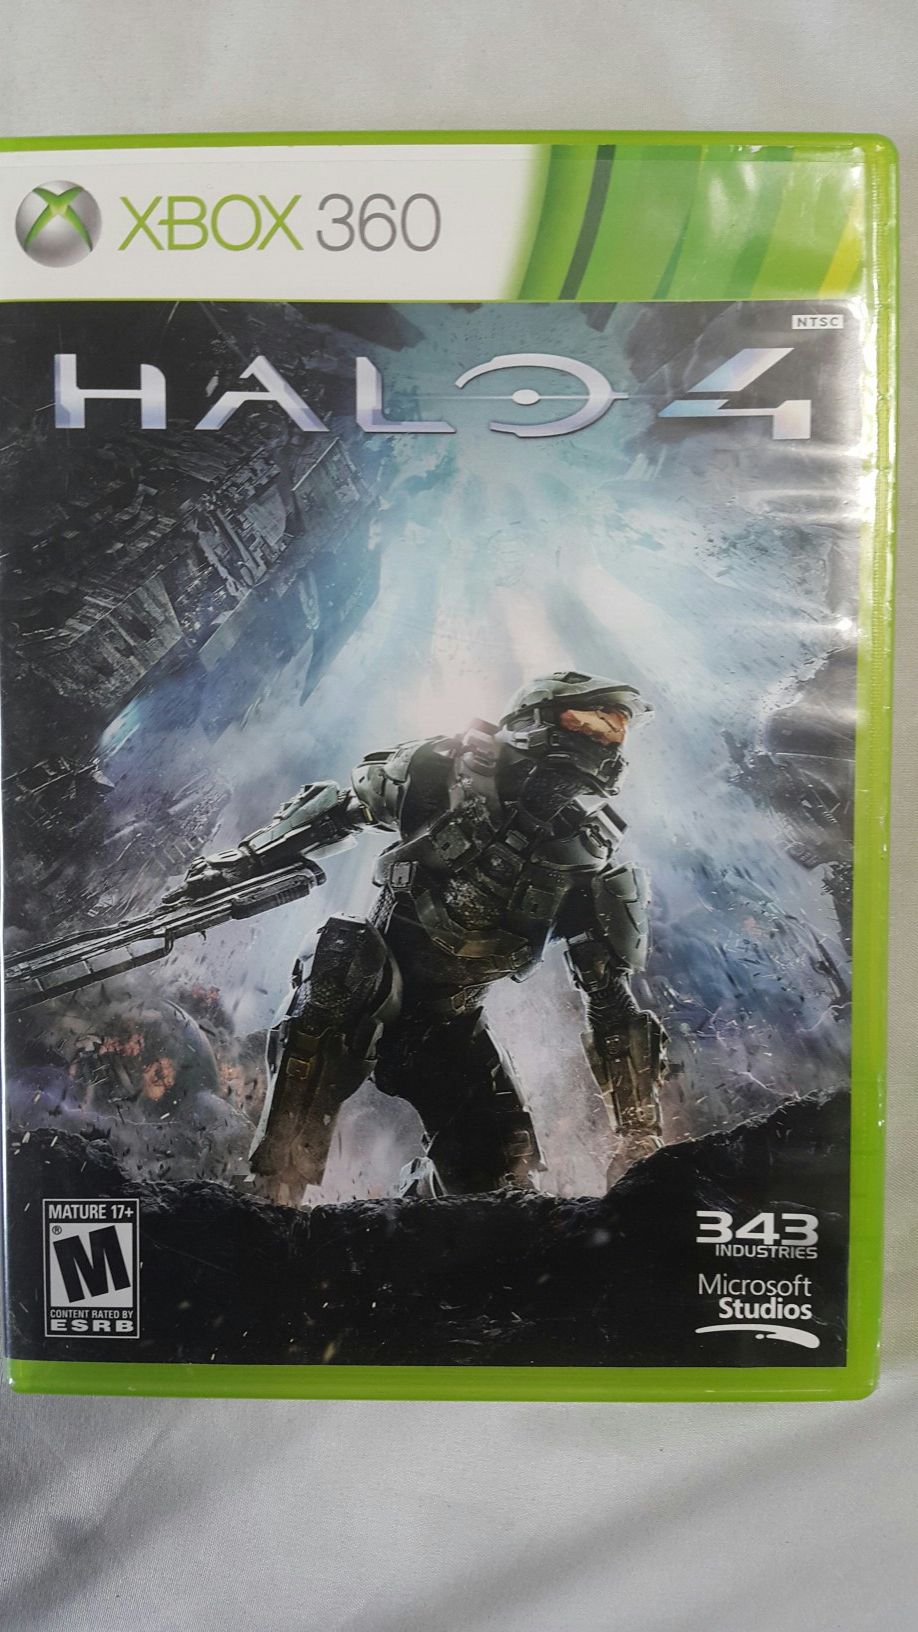 HALO 4 FOR XBOX 360